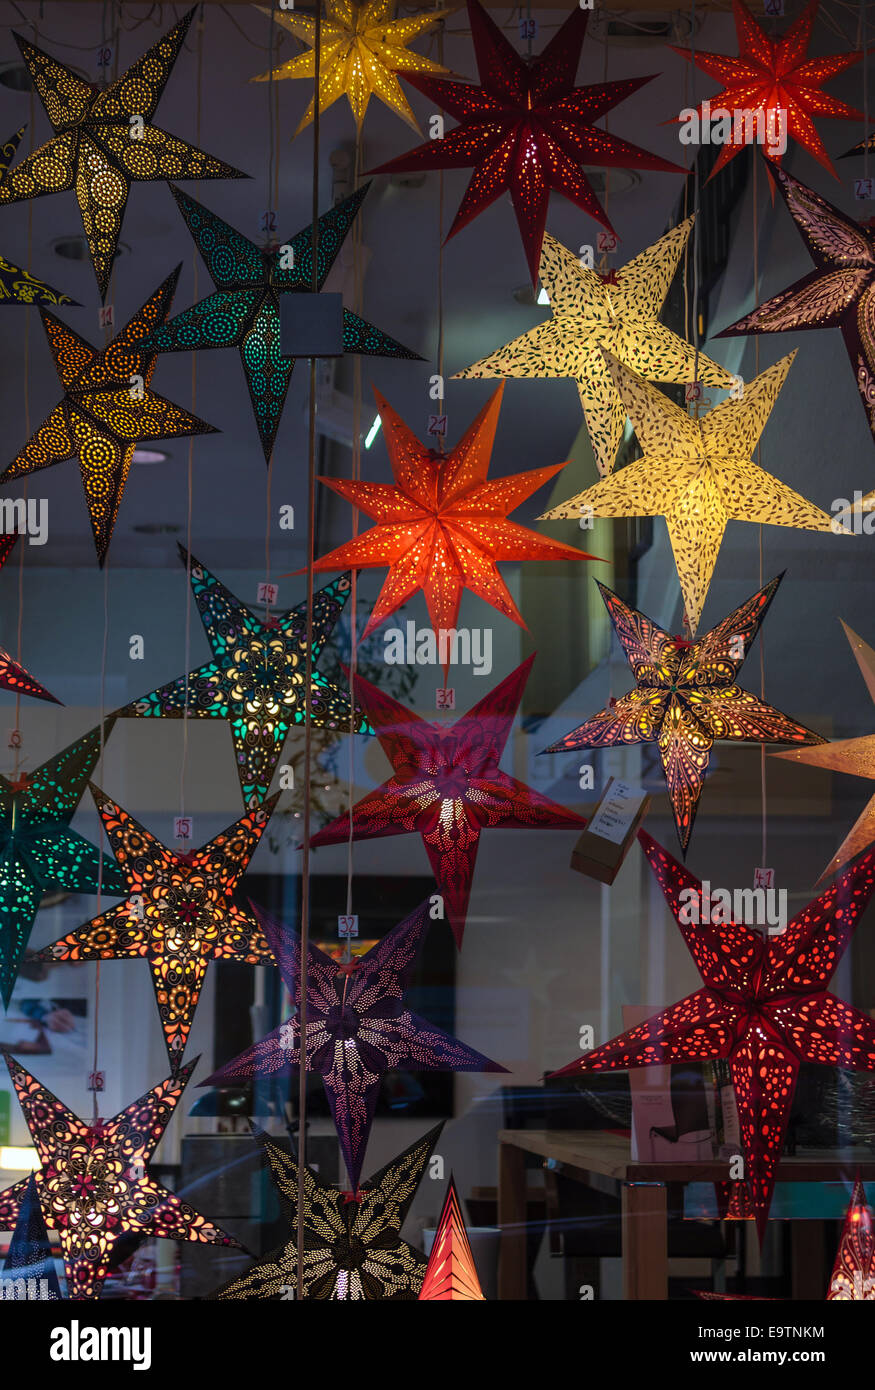 Hand-crafted star lights Stock Photo